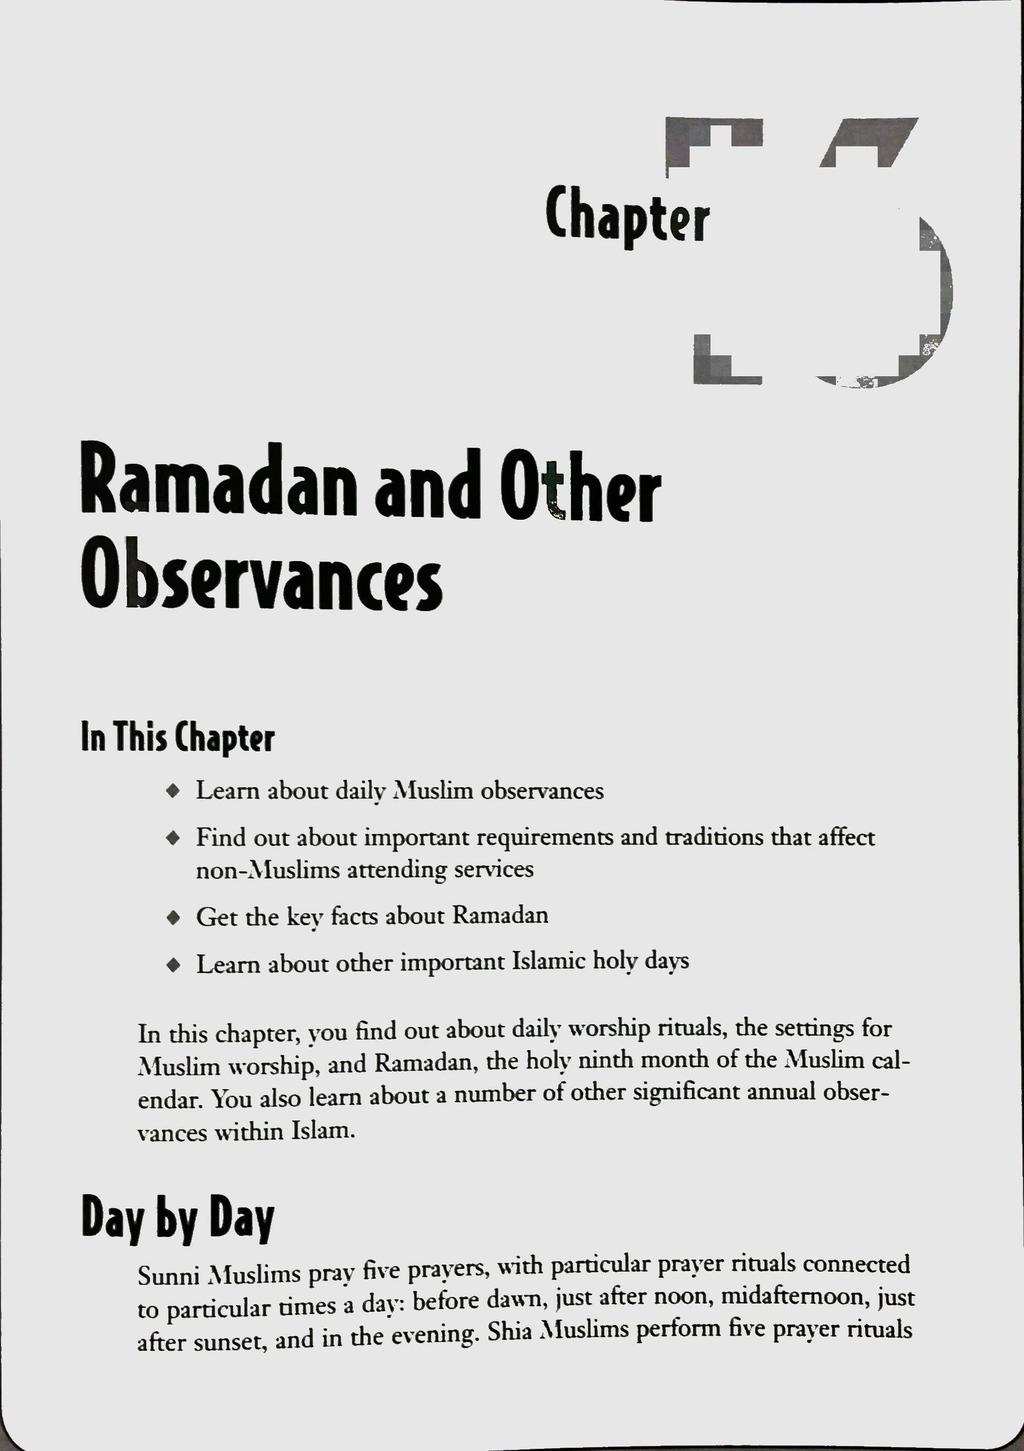 Chapter Ramadan and Other Observances In This Chapter Learn about dailv Muslim observances Find out about important requiremens and u adiüons that affect non-muslims attending services Get the kev